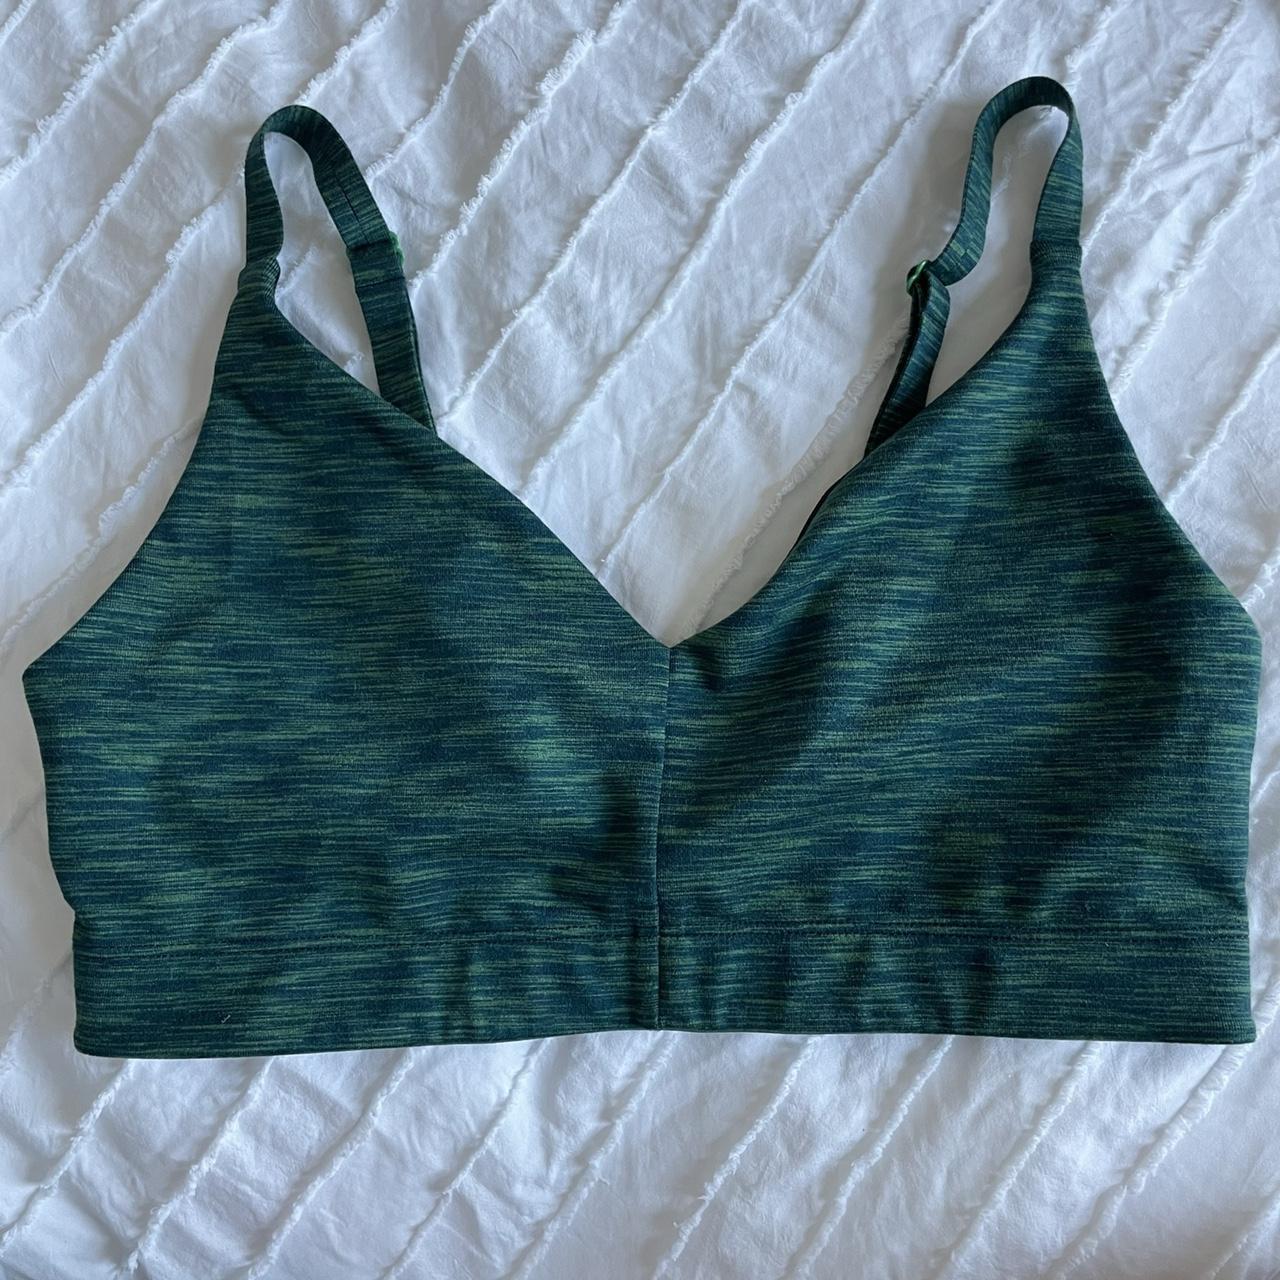 Product Image 1 - Outdoor Voices Sports Bra

Size: Small